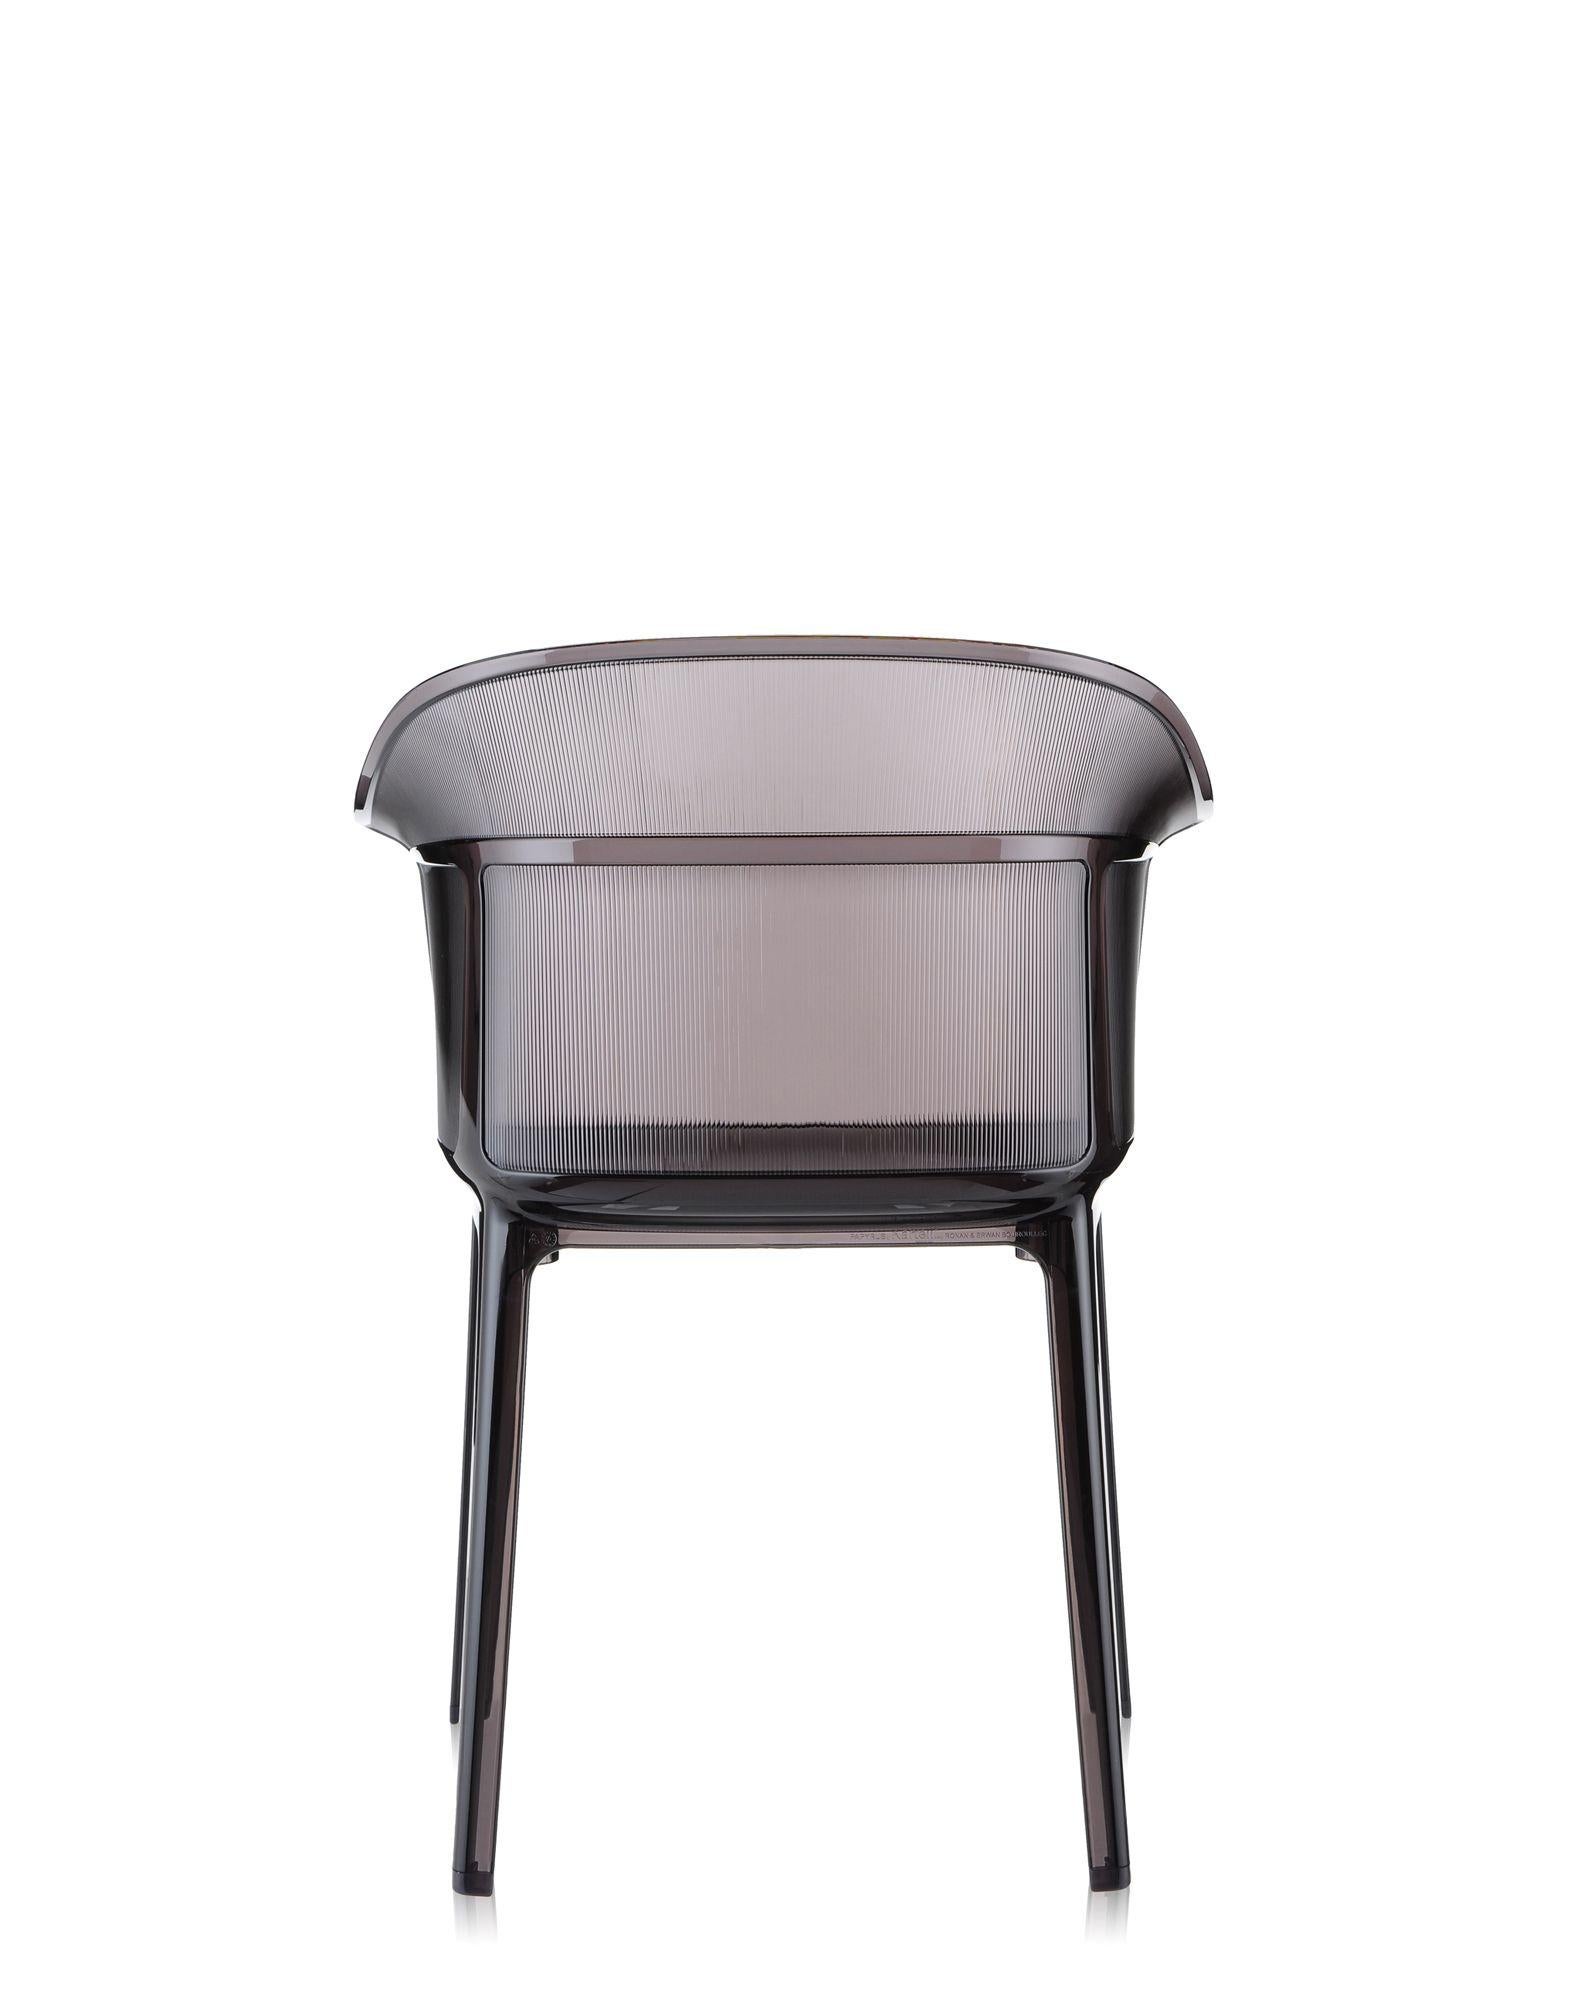 Modern Set of 2 Kartell Papyrus Chair in Smoke Brown by Ronan & Erwan Bouroullec For Sale